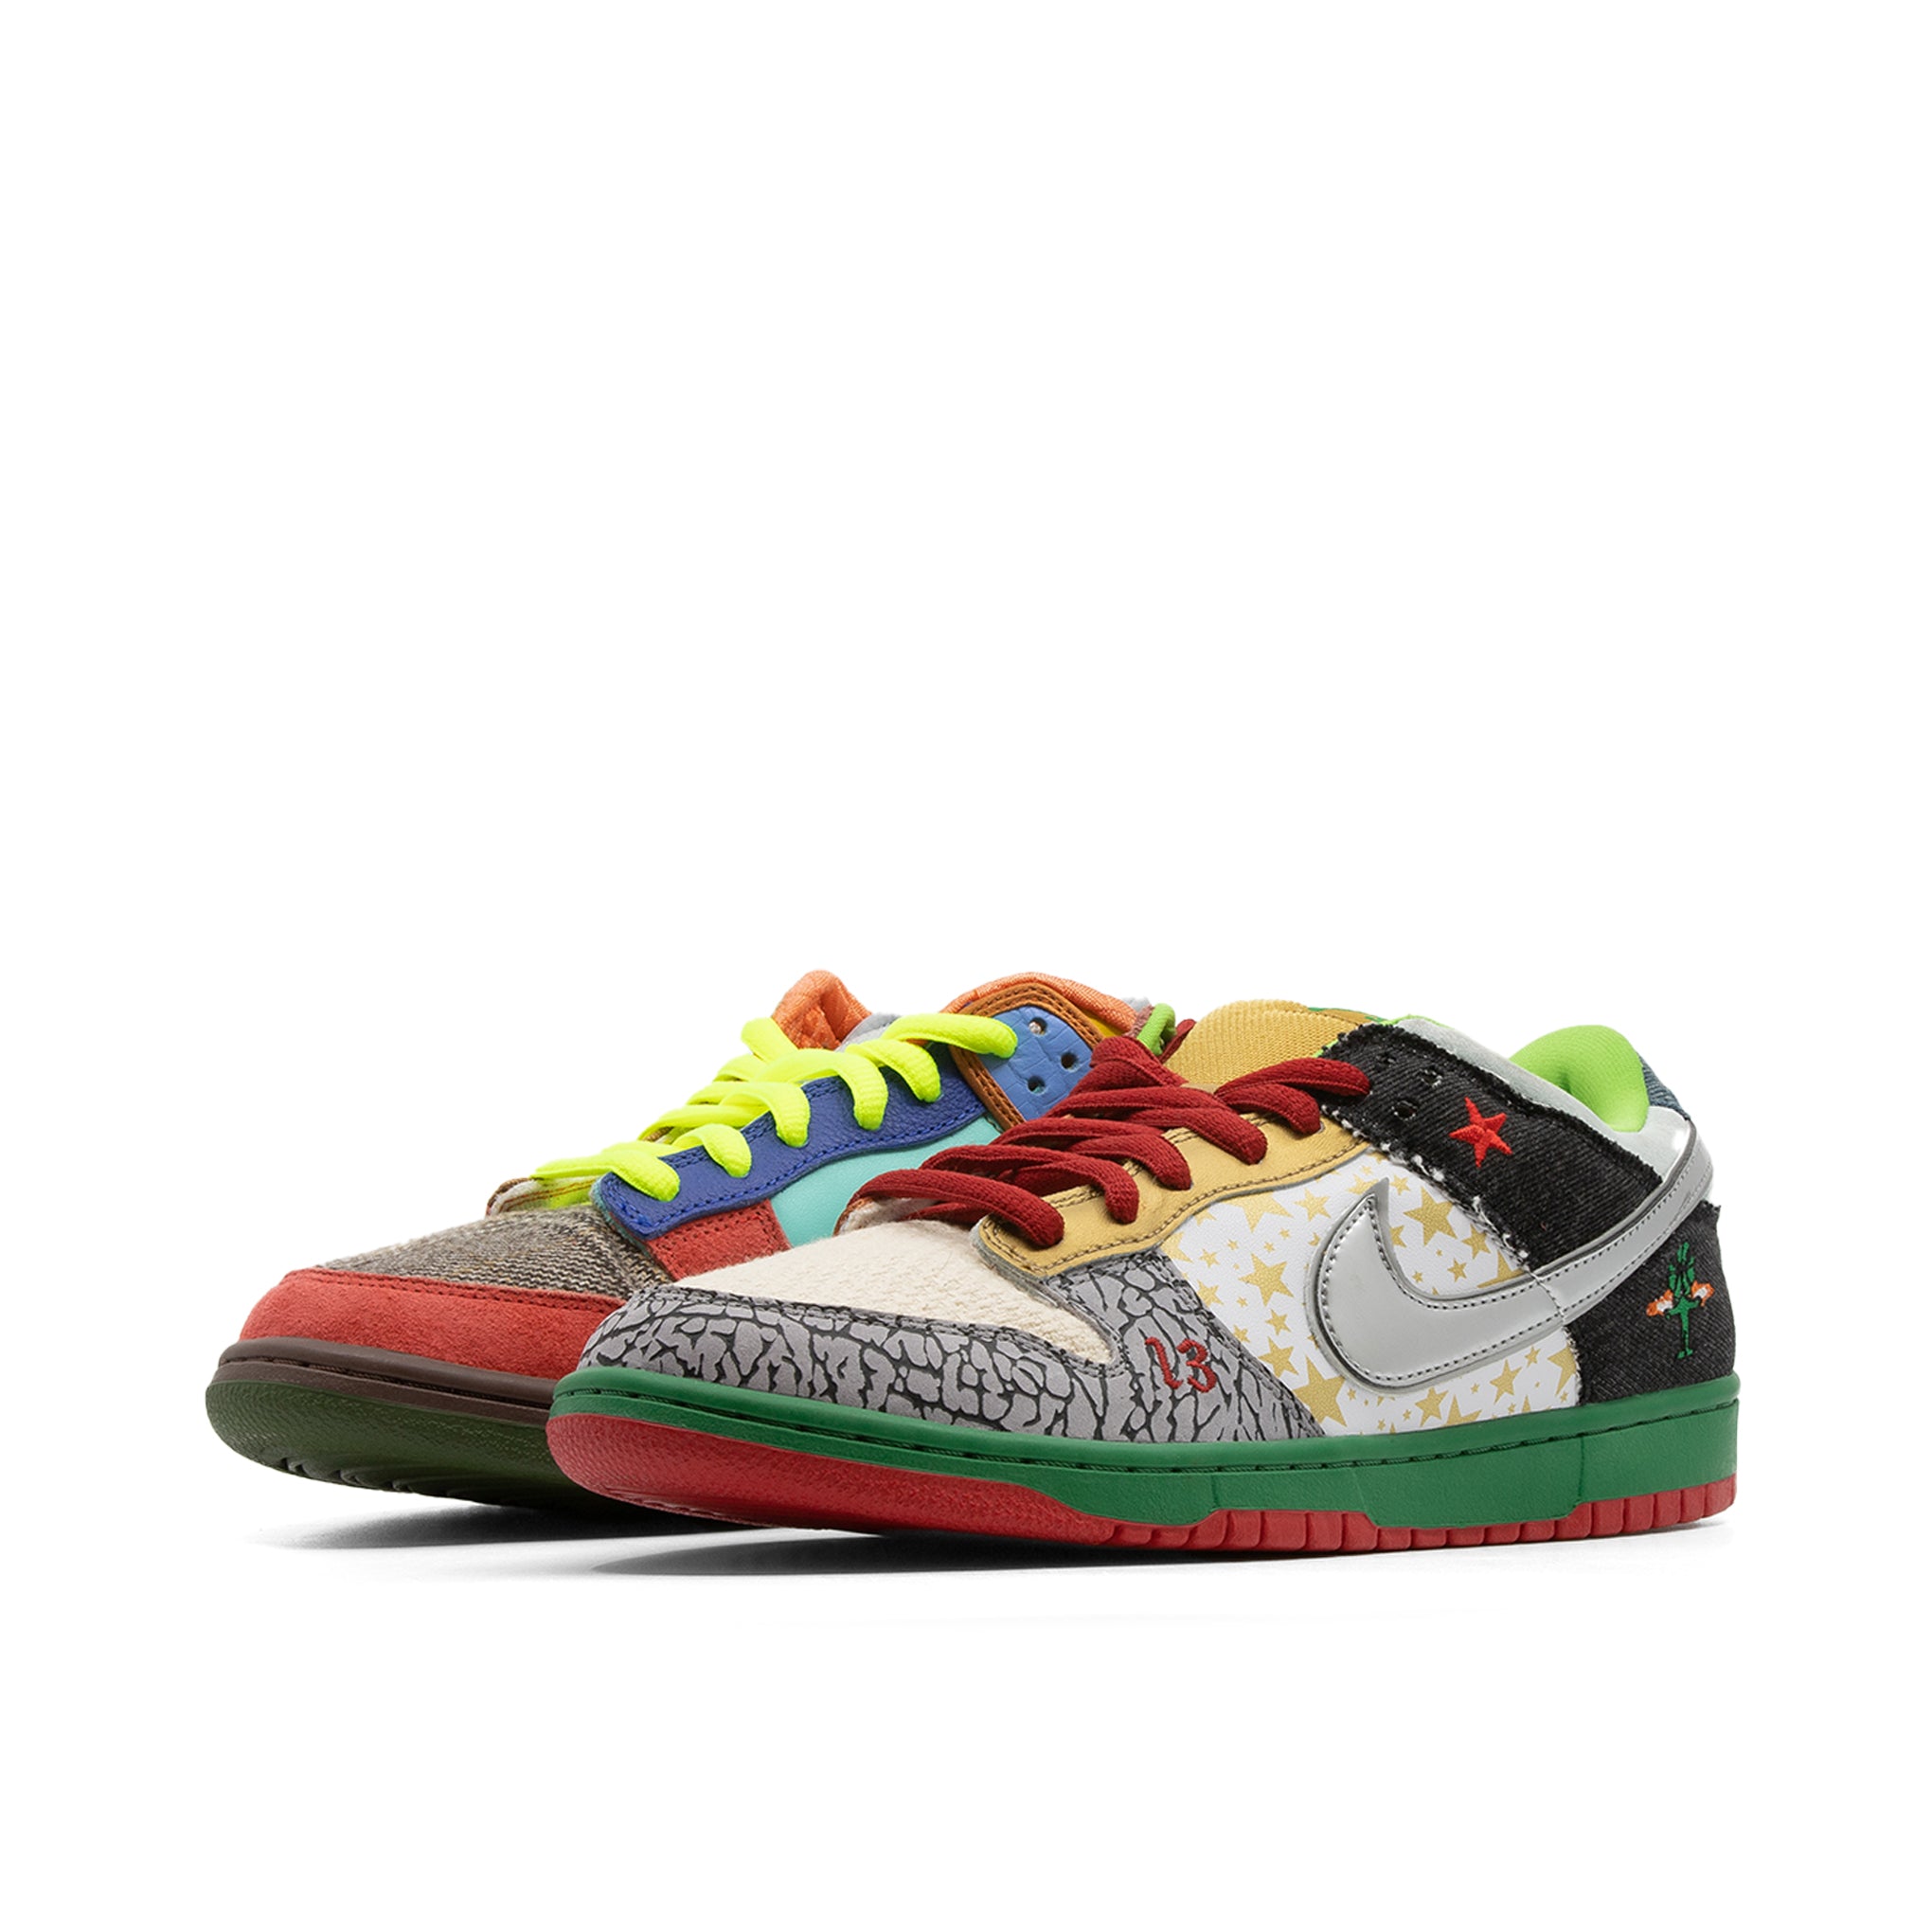 NIKE SB DUNK LOW WHAT THE DUNK